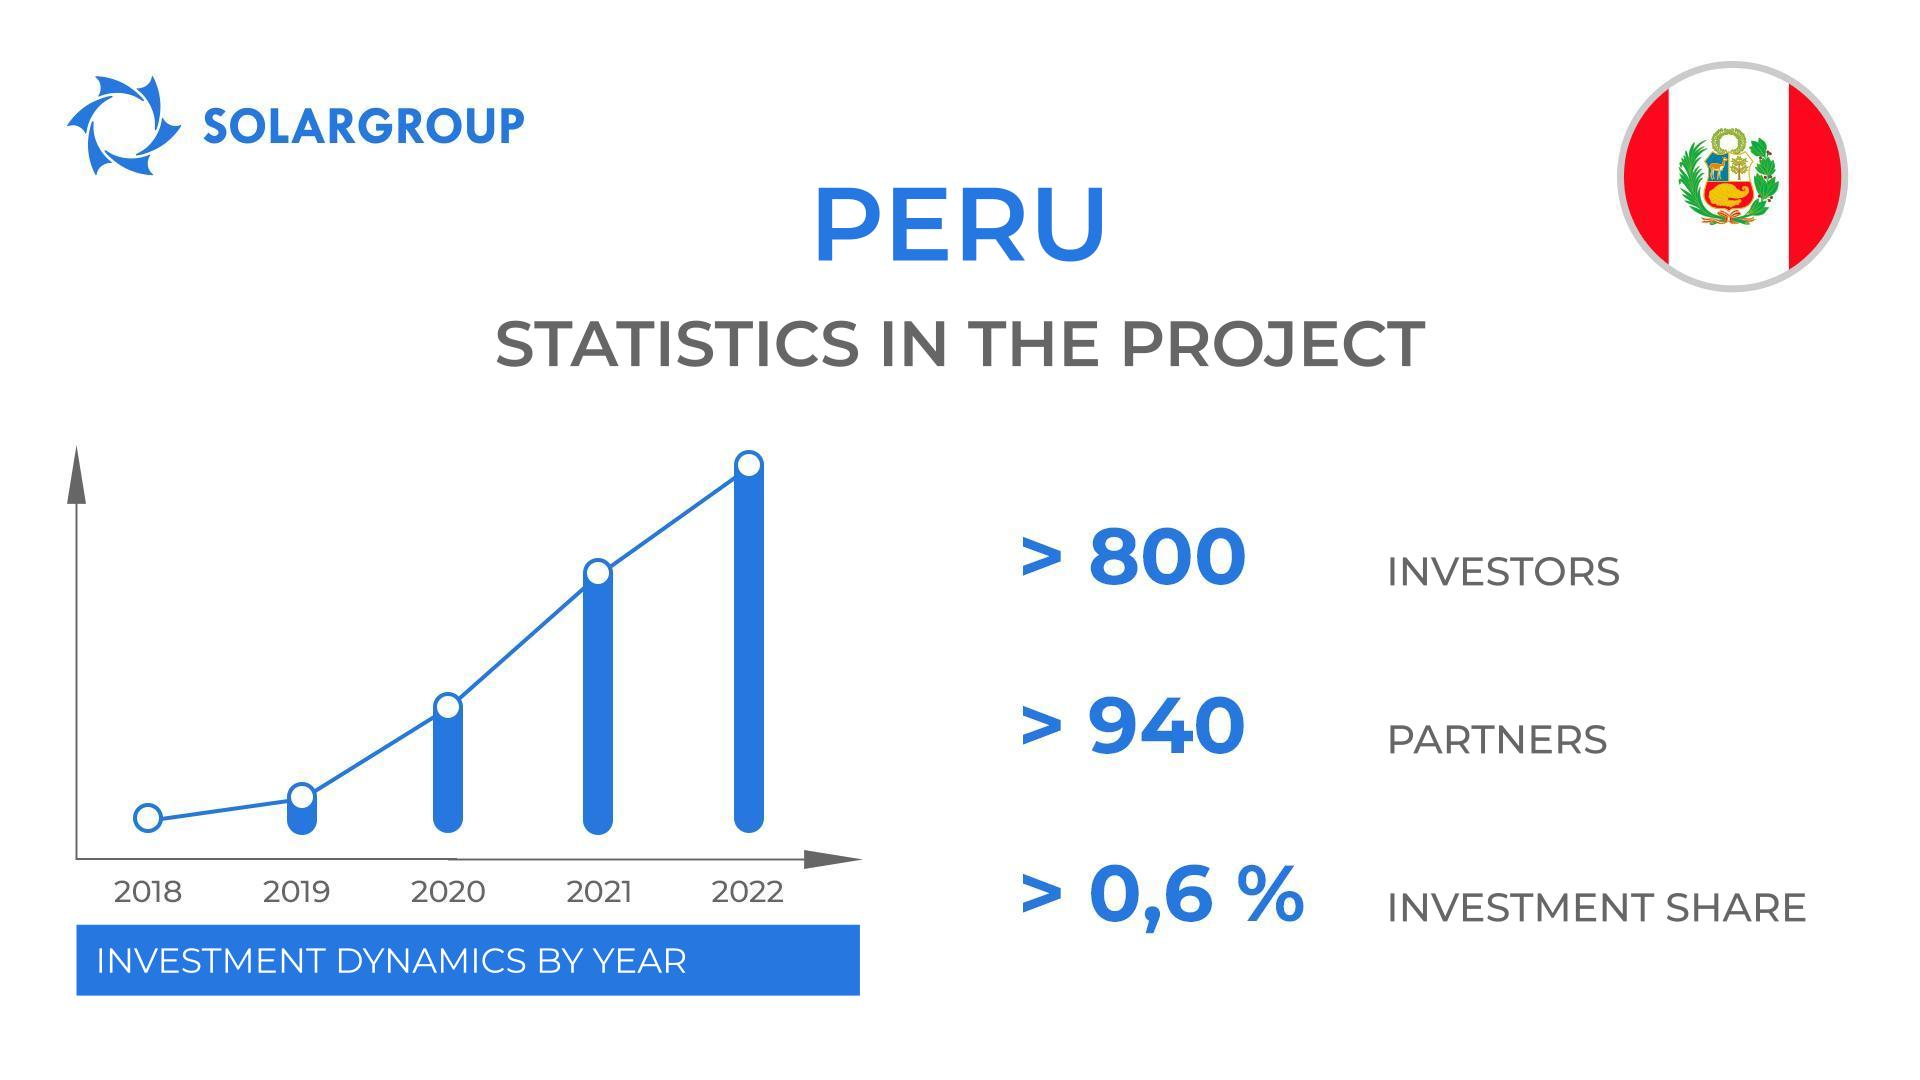 Country in the project: Peru